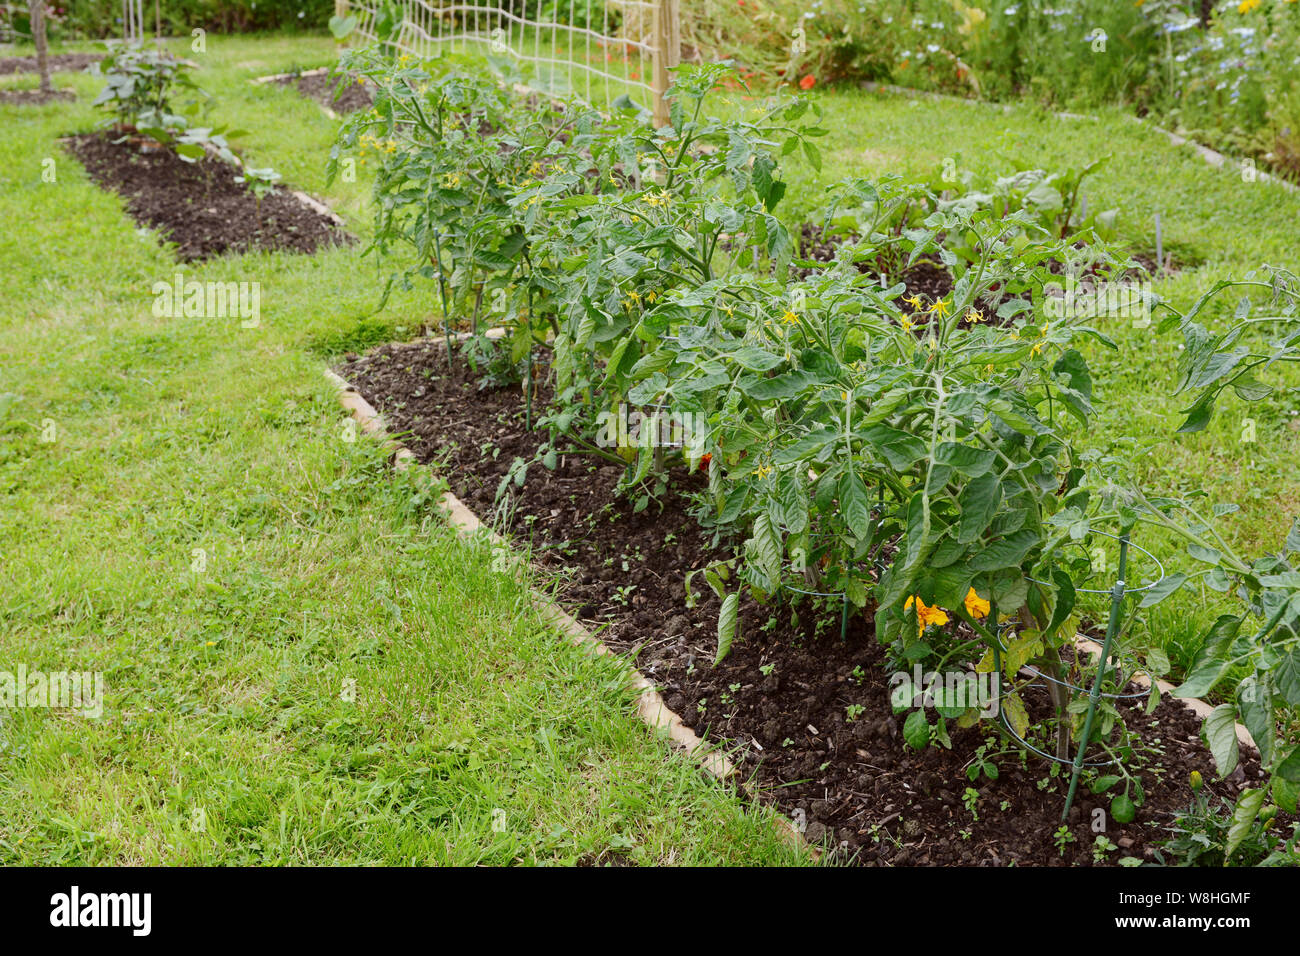 Row of Red Alert cherry tomato plants growing in a tidy rural allotment Stock Photo